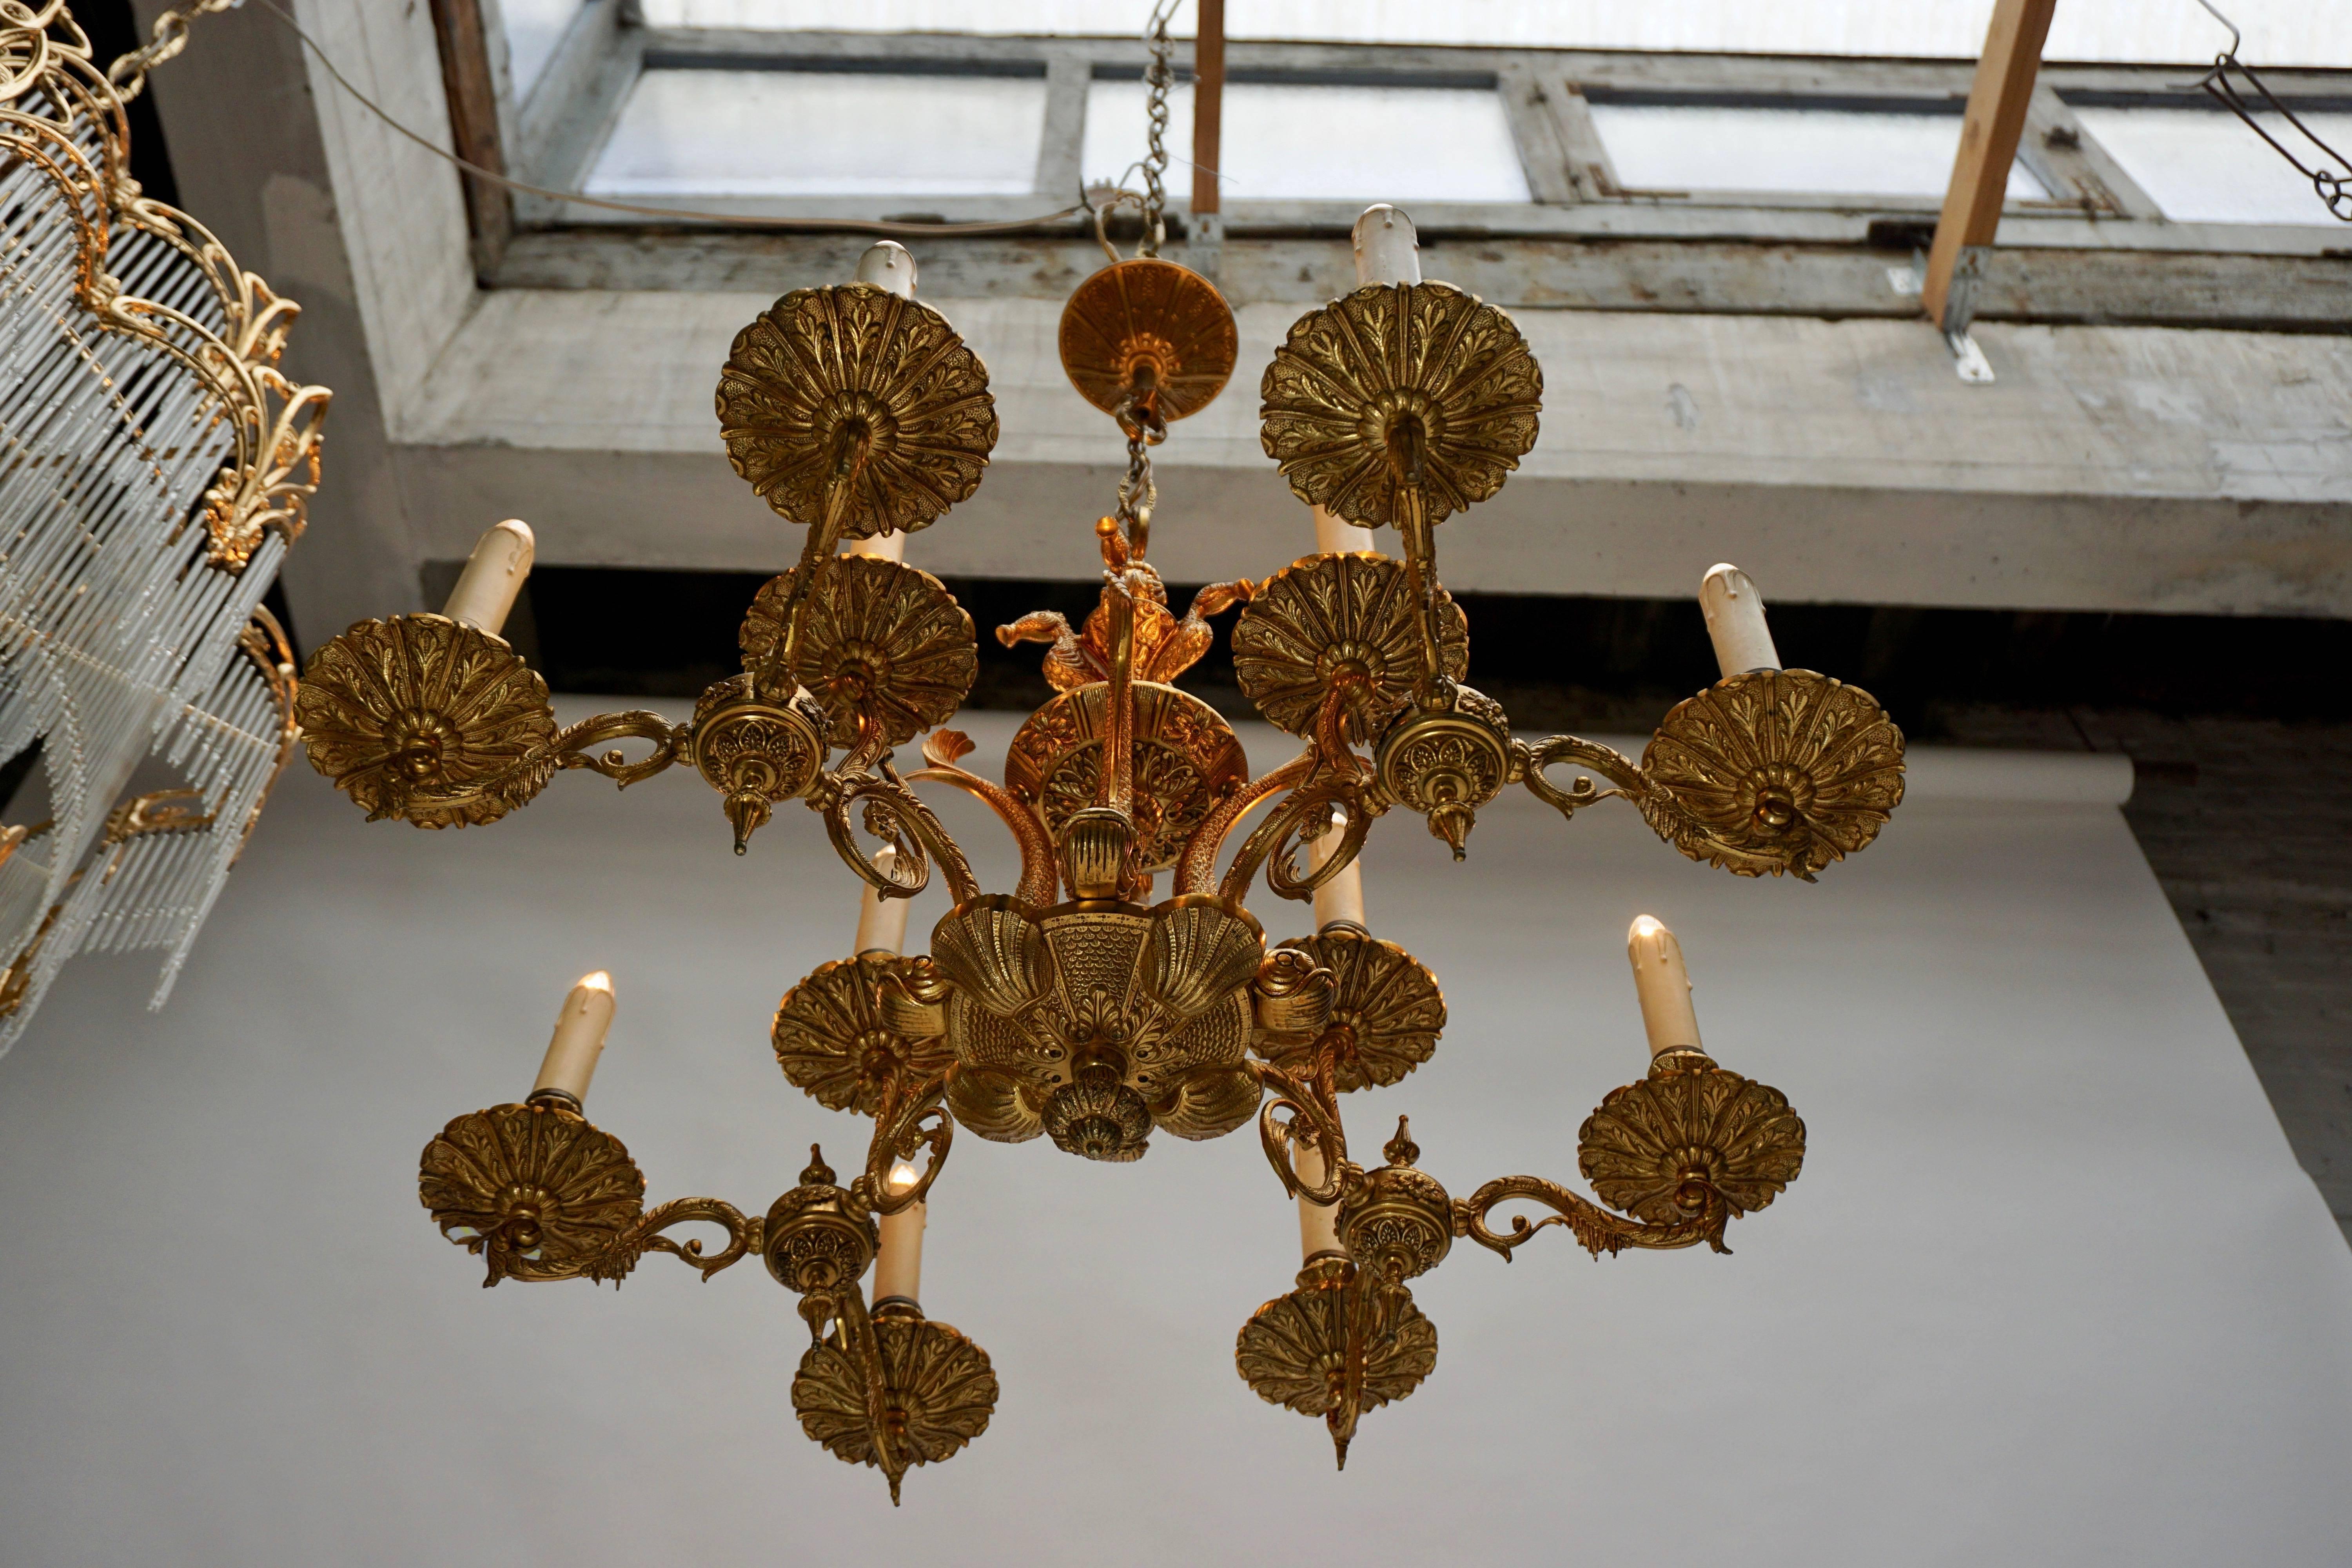 Hollywood Regency Beautiful and Elegant Solid Bronze Chandelier with Fishes in the Centre